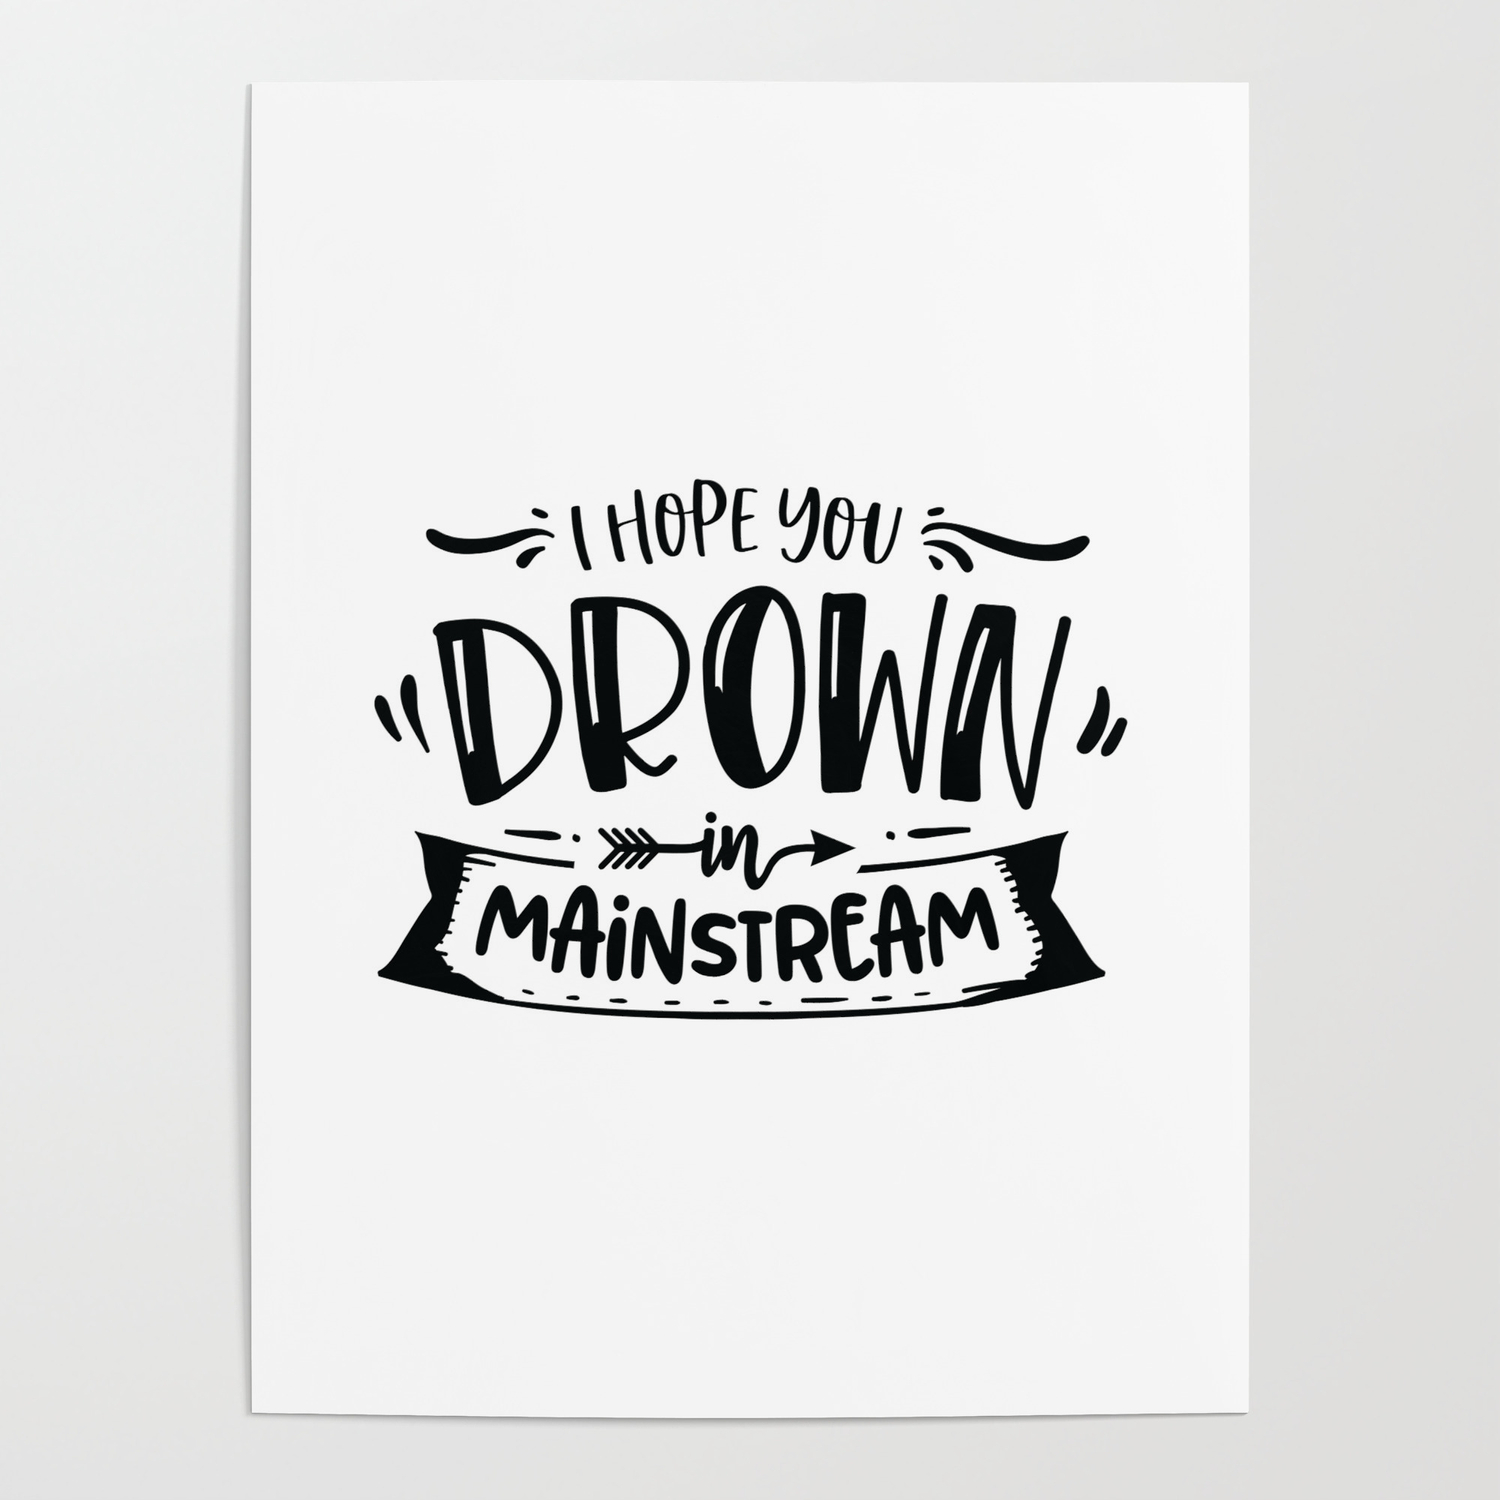 I hope you drown in mainstream - Funny hand drawn quotes illustration. Funny  humor. Life sayings. Poster by The Life Quotes | Society6